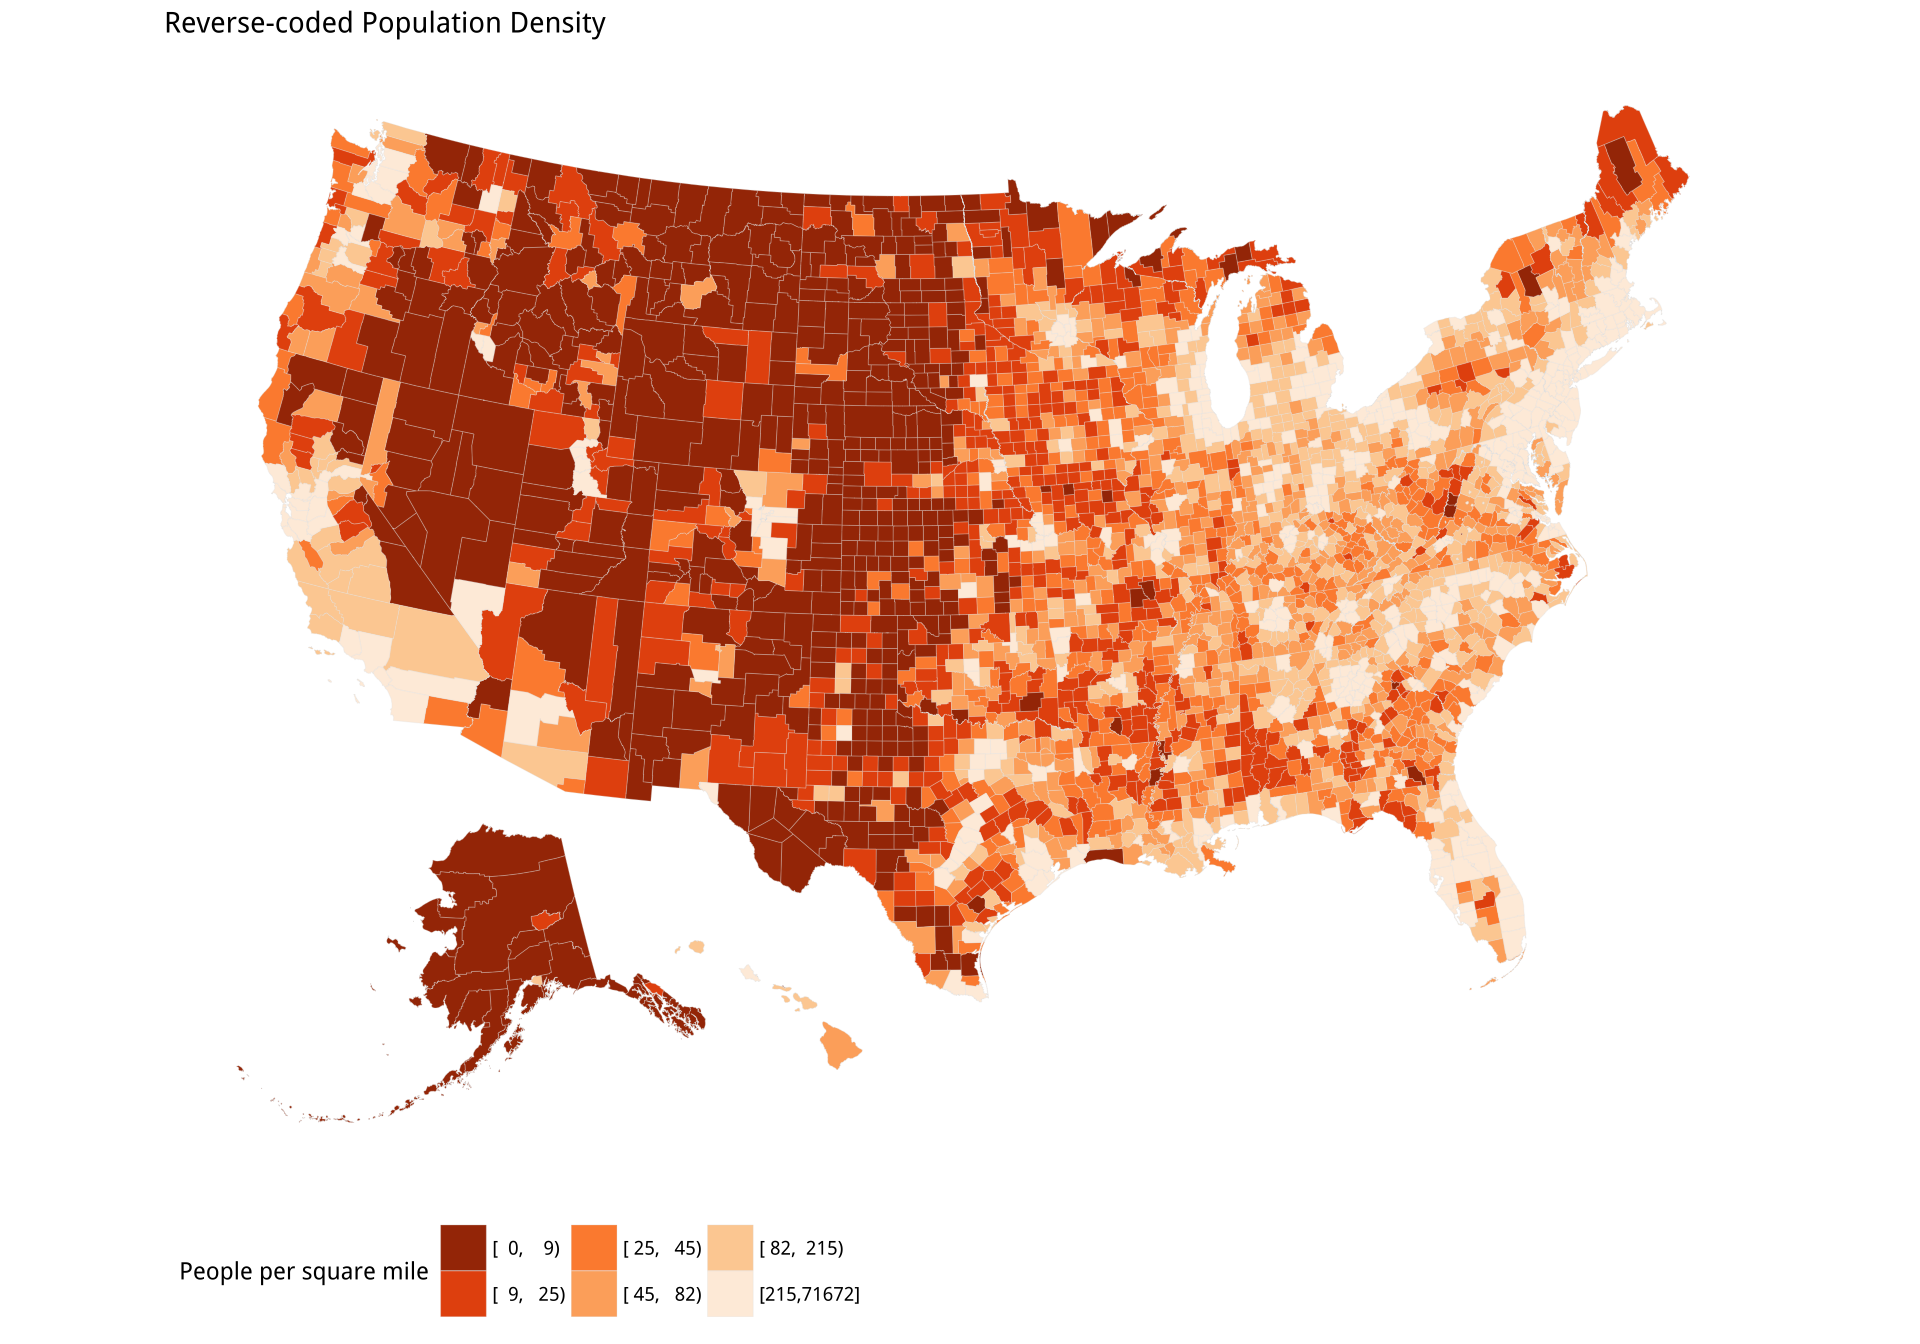 Gun-related suicides by county; Reverse-coded population density by county. Before tweeting this picture, please read the text for discussion of what is wrong with it.